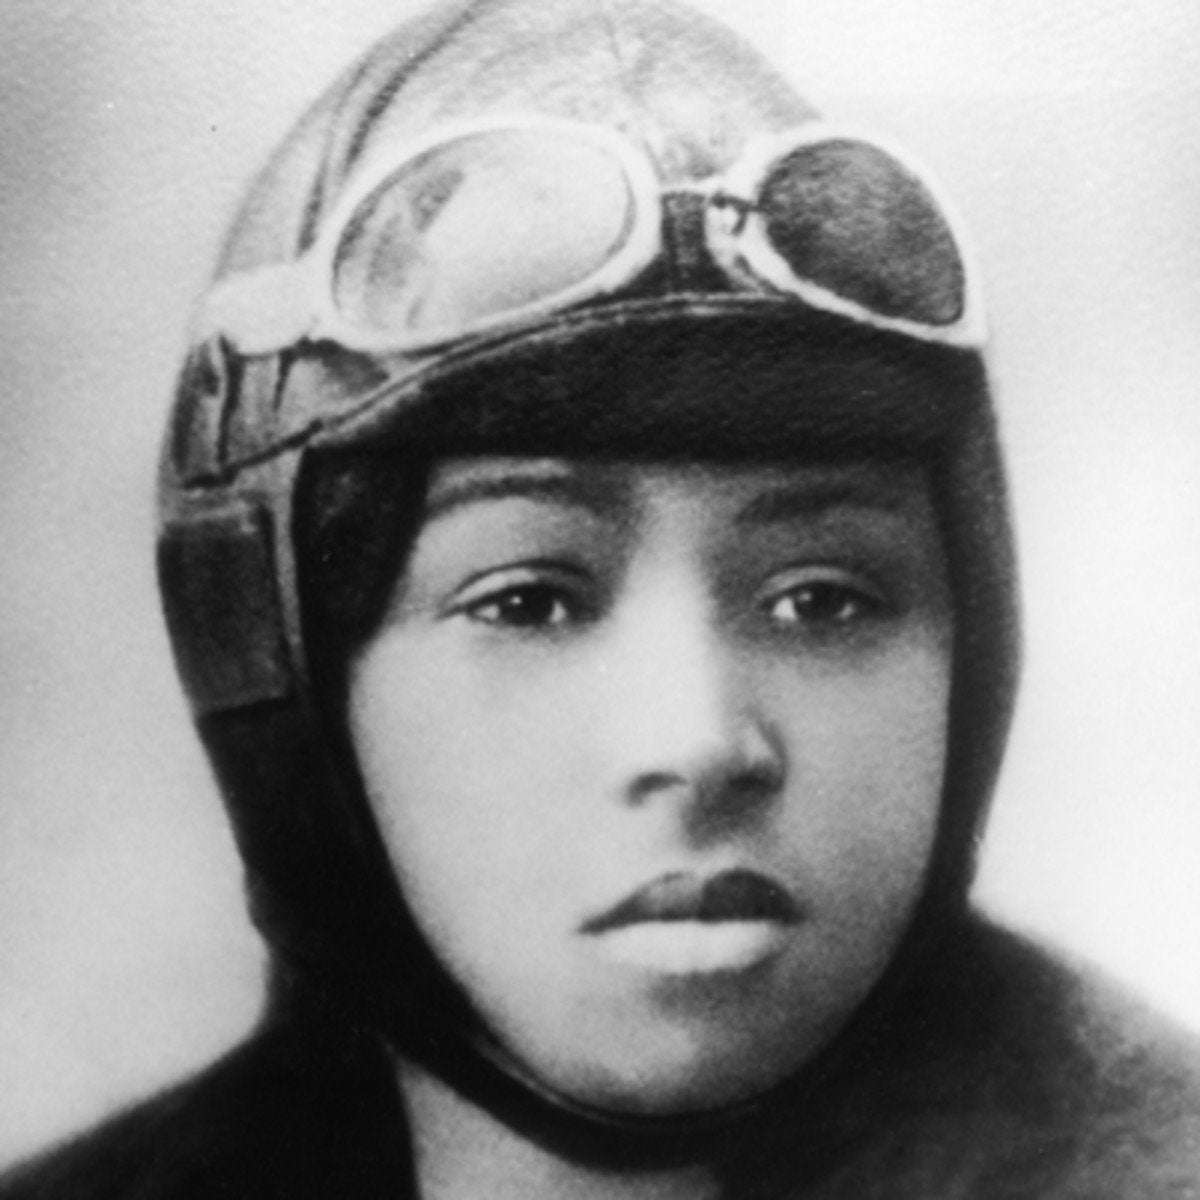 image for TIL Bessie Coleman was an American Aviator and the first black woman to earn a pilot's license.Because flying schools in the United States denied her entry,she taught herself French and moved to France,earning her license from France's well-known Caudron Brother's School of Aviation in just 7 months